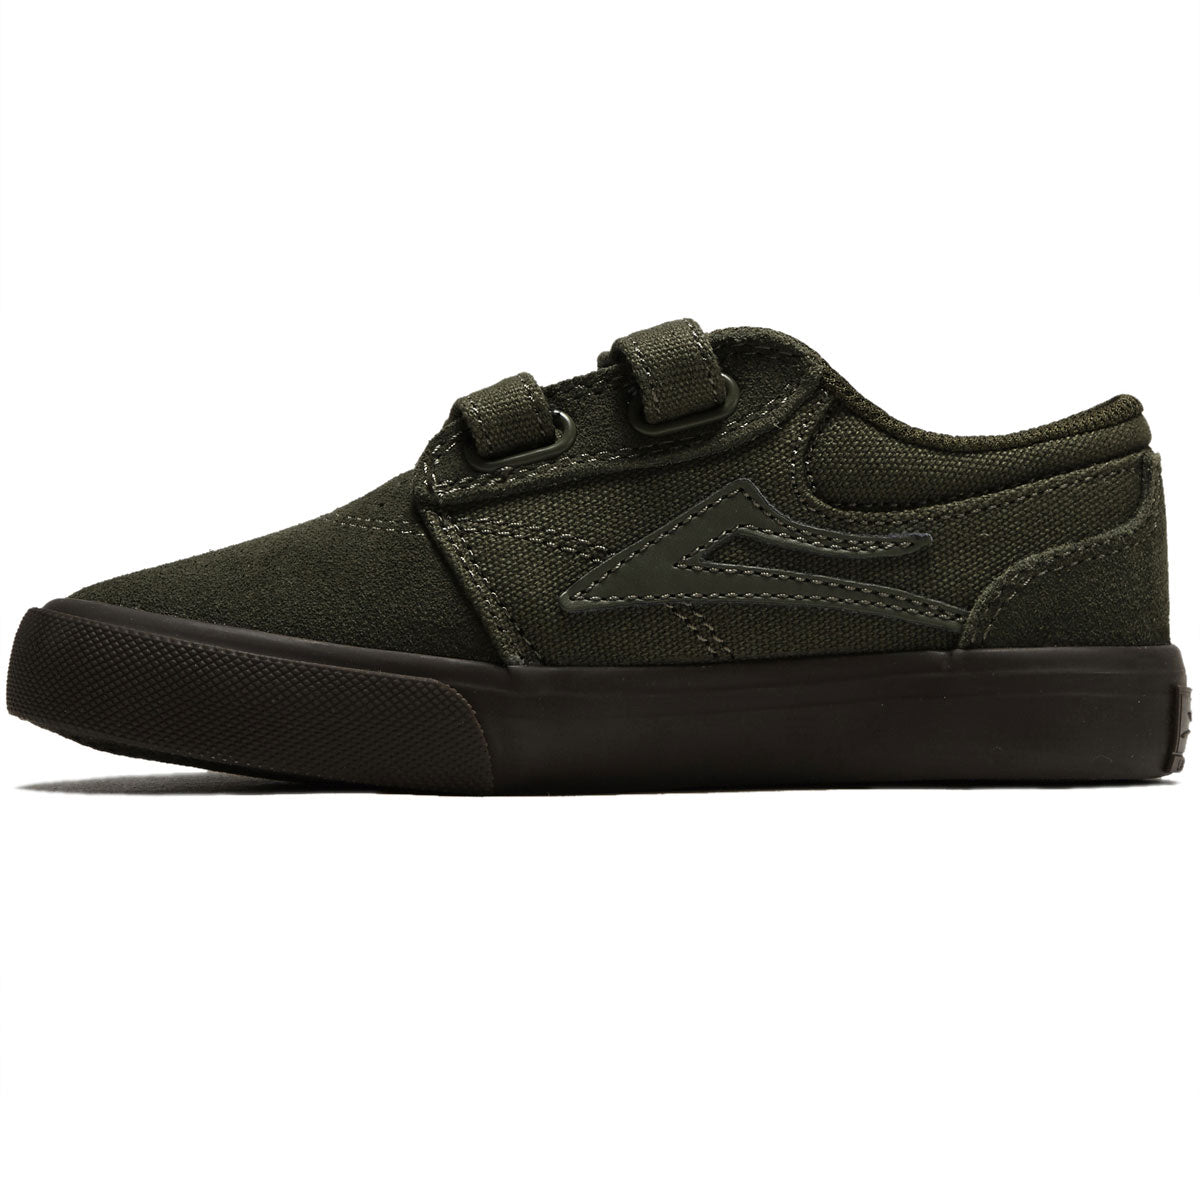 Lakai Youth Griffin Shoes - Olive/Gum Suede image 2